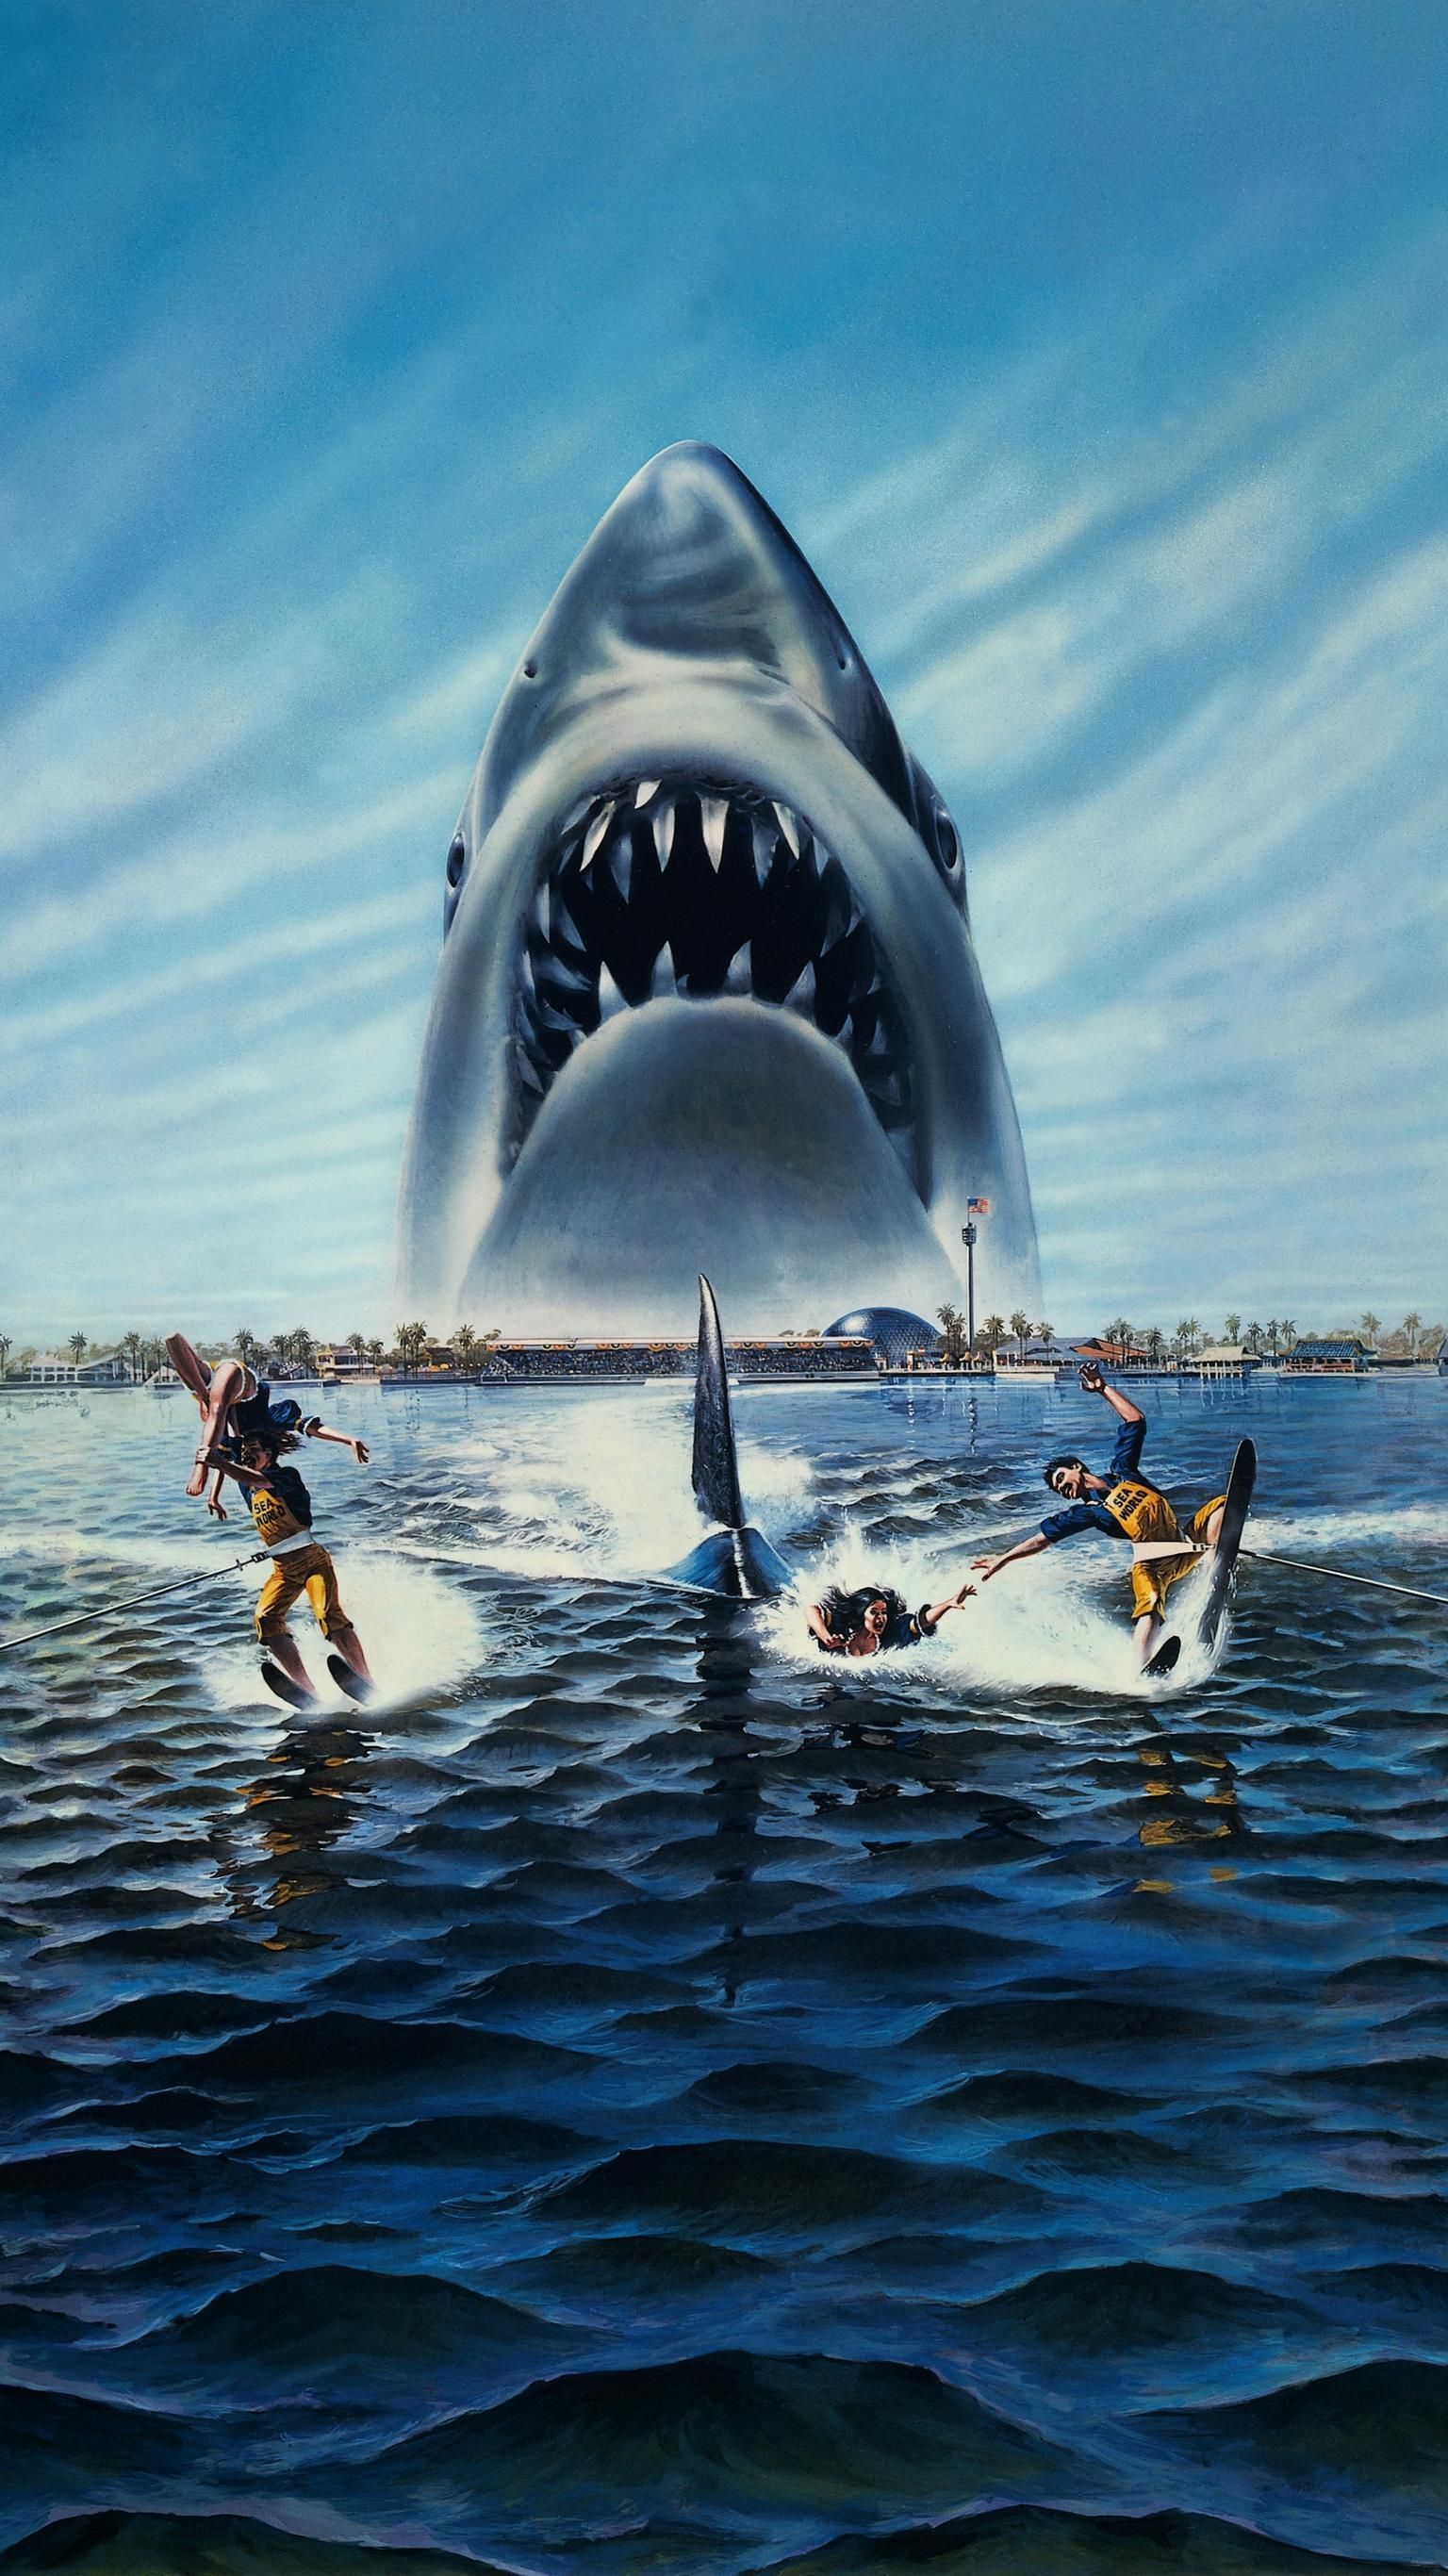 Jaws 3 D (1983) Phone Wallpaper. Moviemania. Jaws Movie Posters, Horror Movie Posters